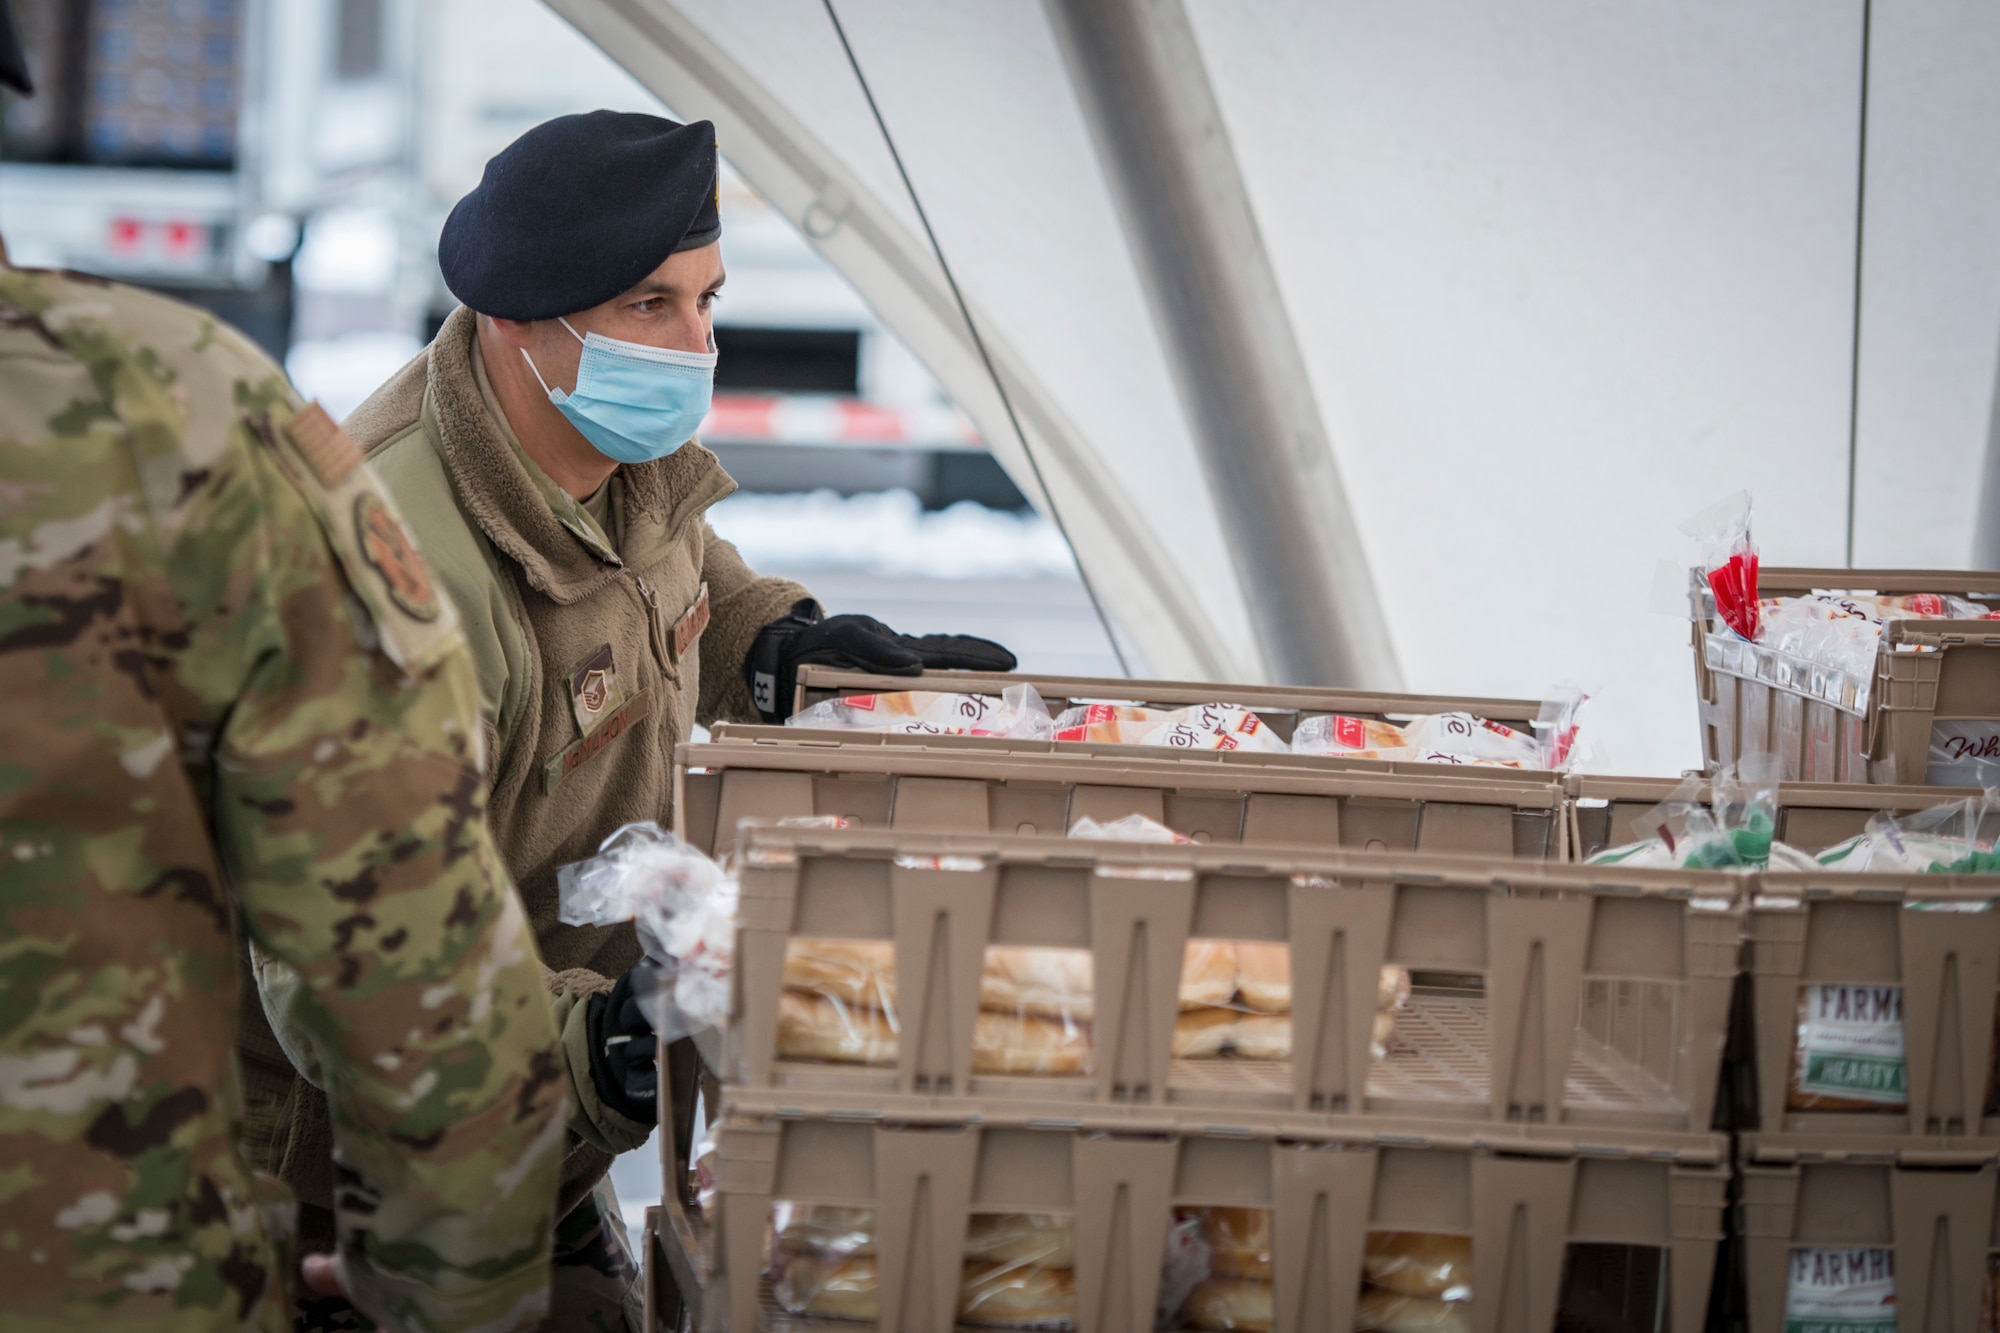 U.S. Air Force Master Sgt. Ian McMahon, 103rd Security Forces Squadron, organizes bread trays for distribution at Rentschler Field in East Hartford, Connecticut, Feb. 4, 2021. Airmen from the Connecticut National Guard’s 103rd Airlift Wing are supporting logistics operations at Foodshare’s drive-thru emergency distribution site.